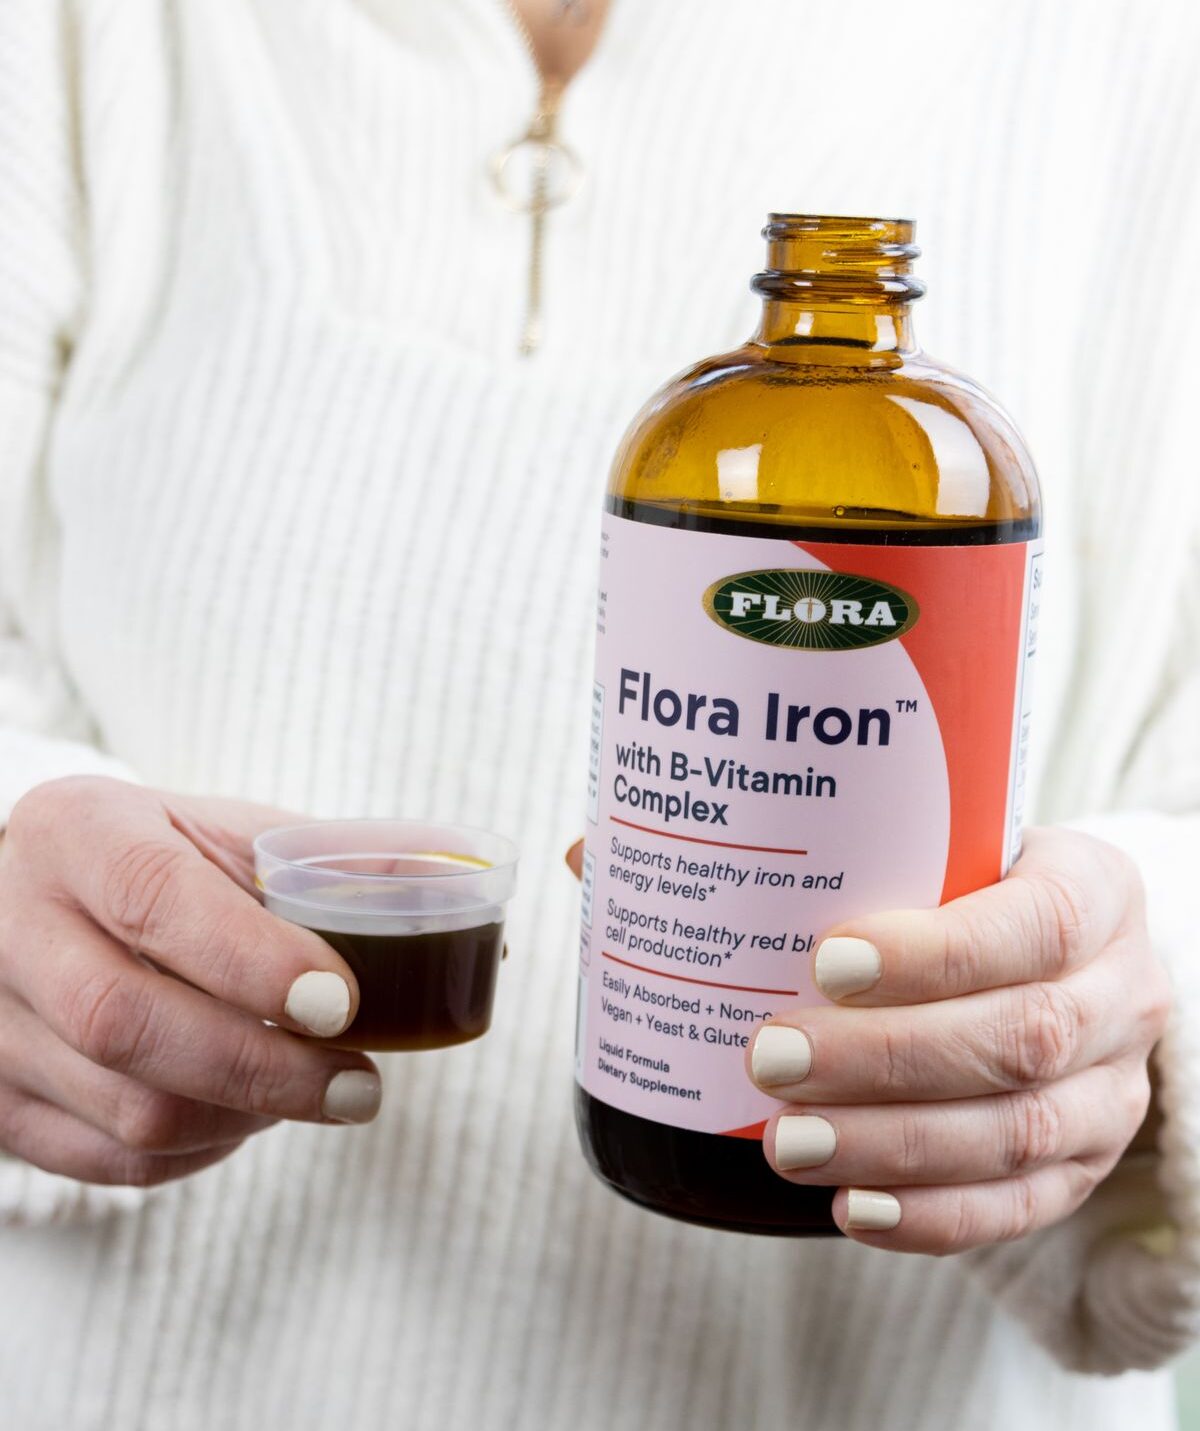 A woman holding a bottle and serving of Flora Iron